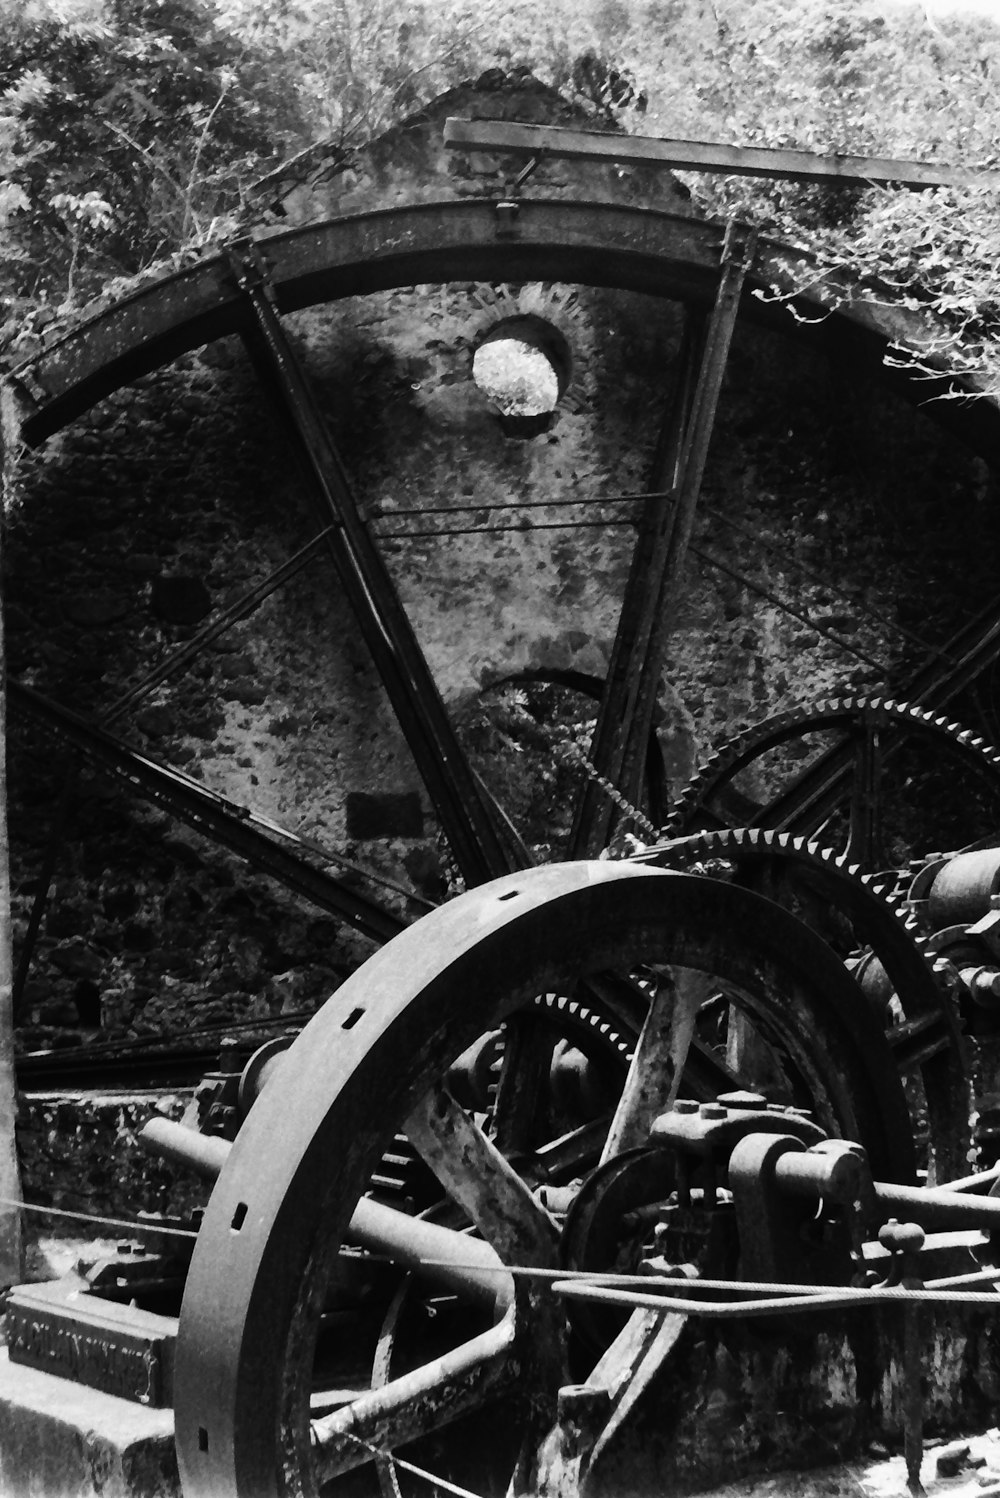 a black and white photo of an old machine